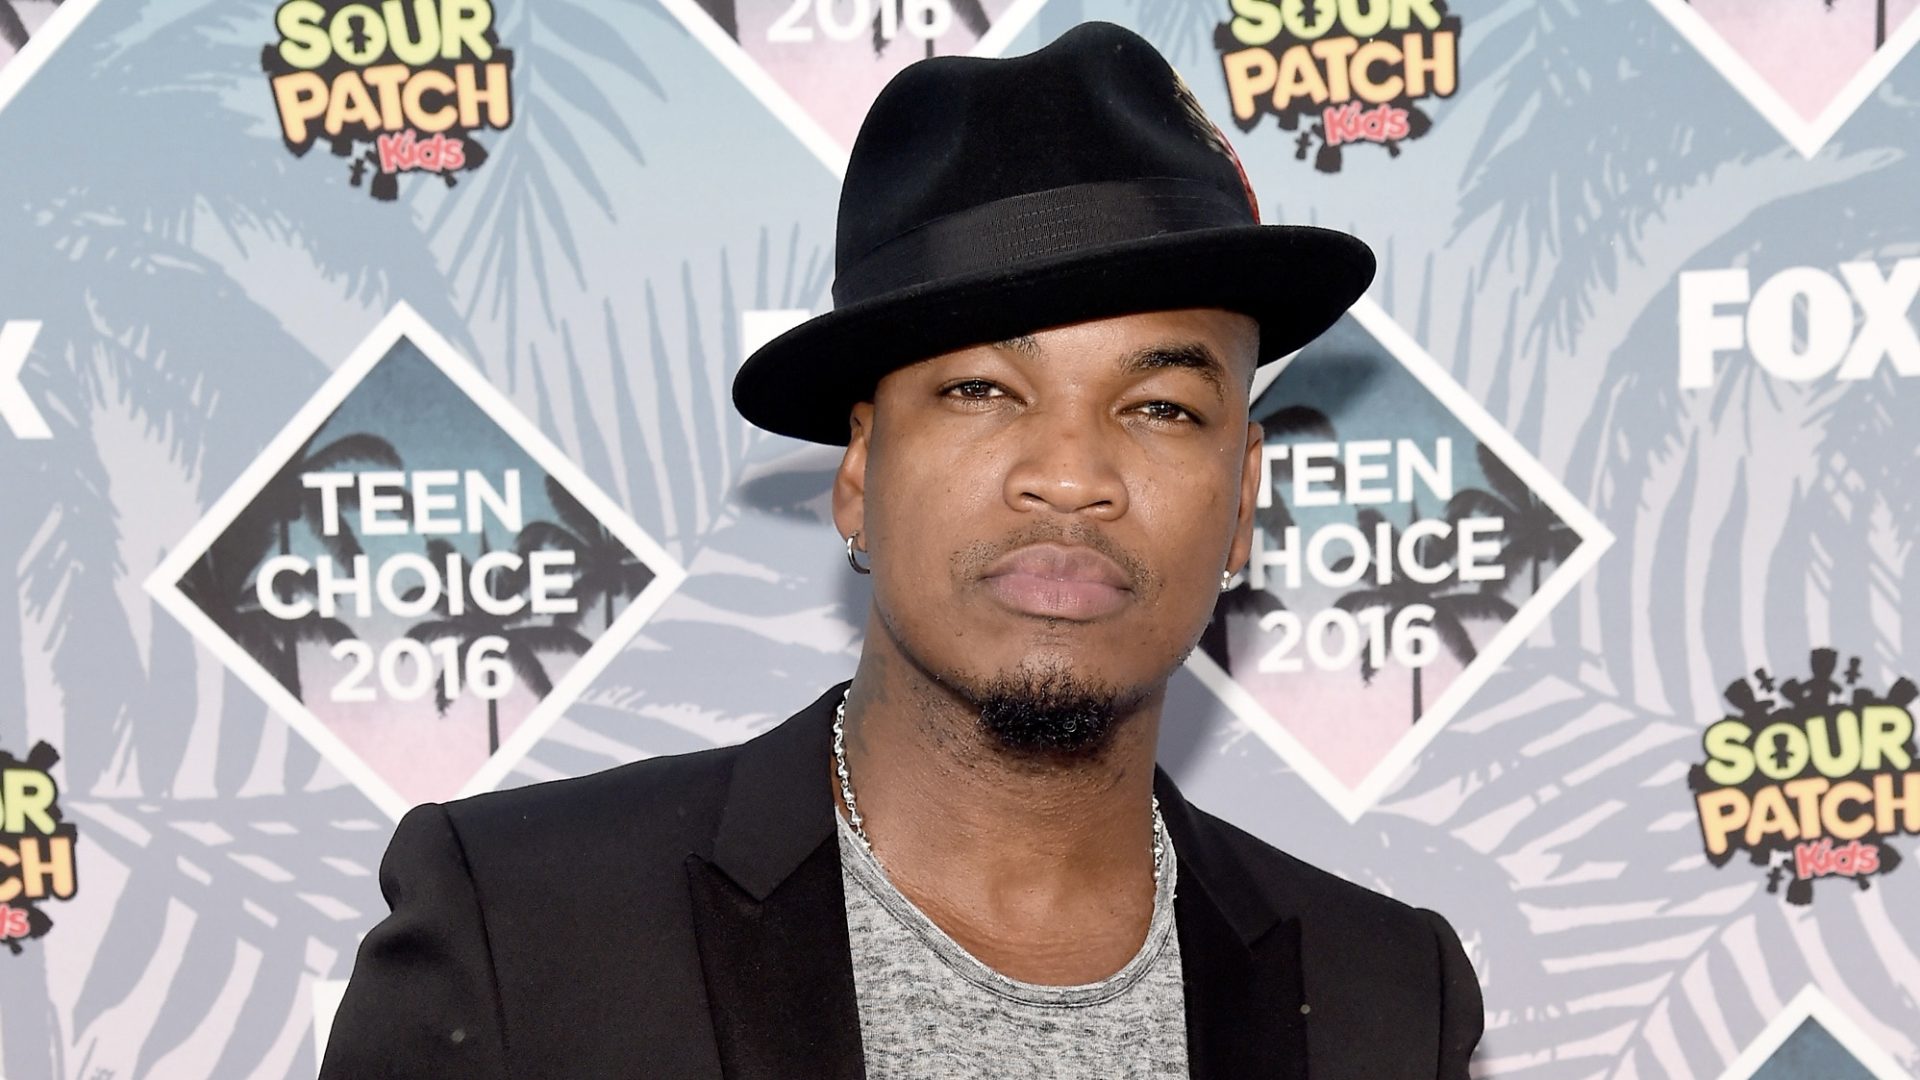 Ne-Yo Apologizes To The LGBT Community After Sharing 'Insensitive' Comments Regarding Children & Gender Identity (Video)